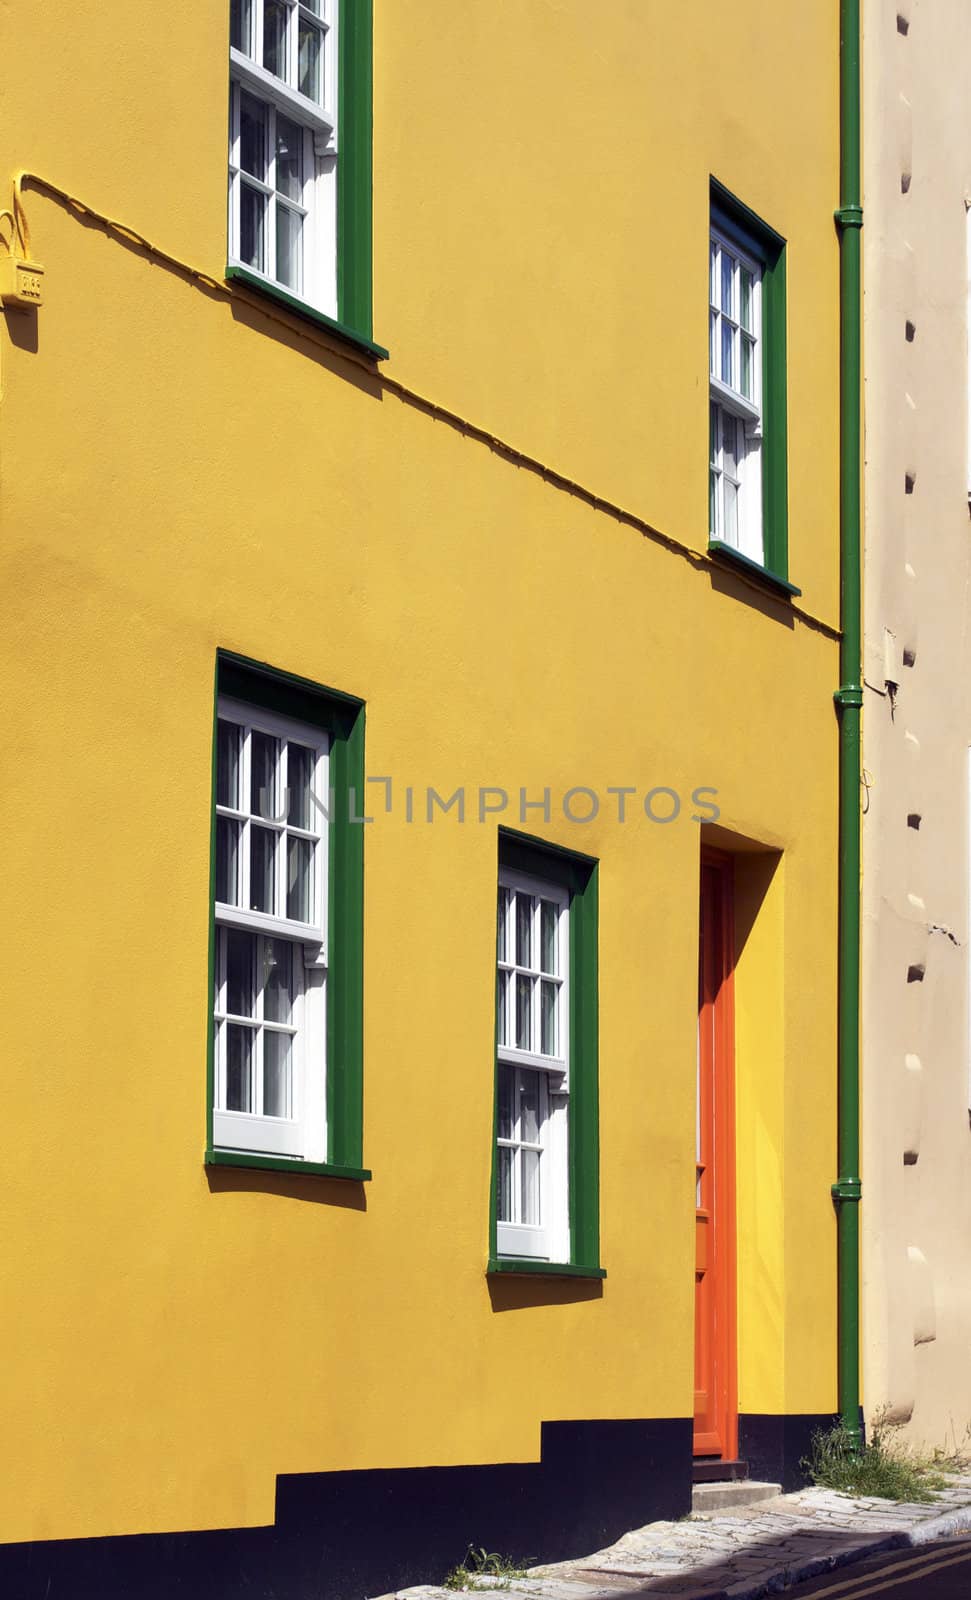 The brightly painted yellow frontage of a coastal cottage. Located in the coastal town of Lyme Regis in Dorset, England. Window frames painted in bright green, with a vivid orange painted door.